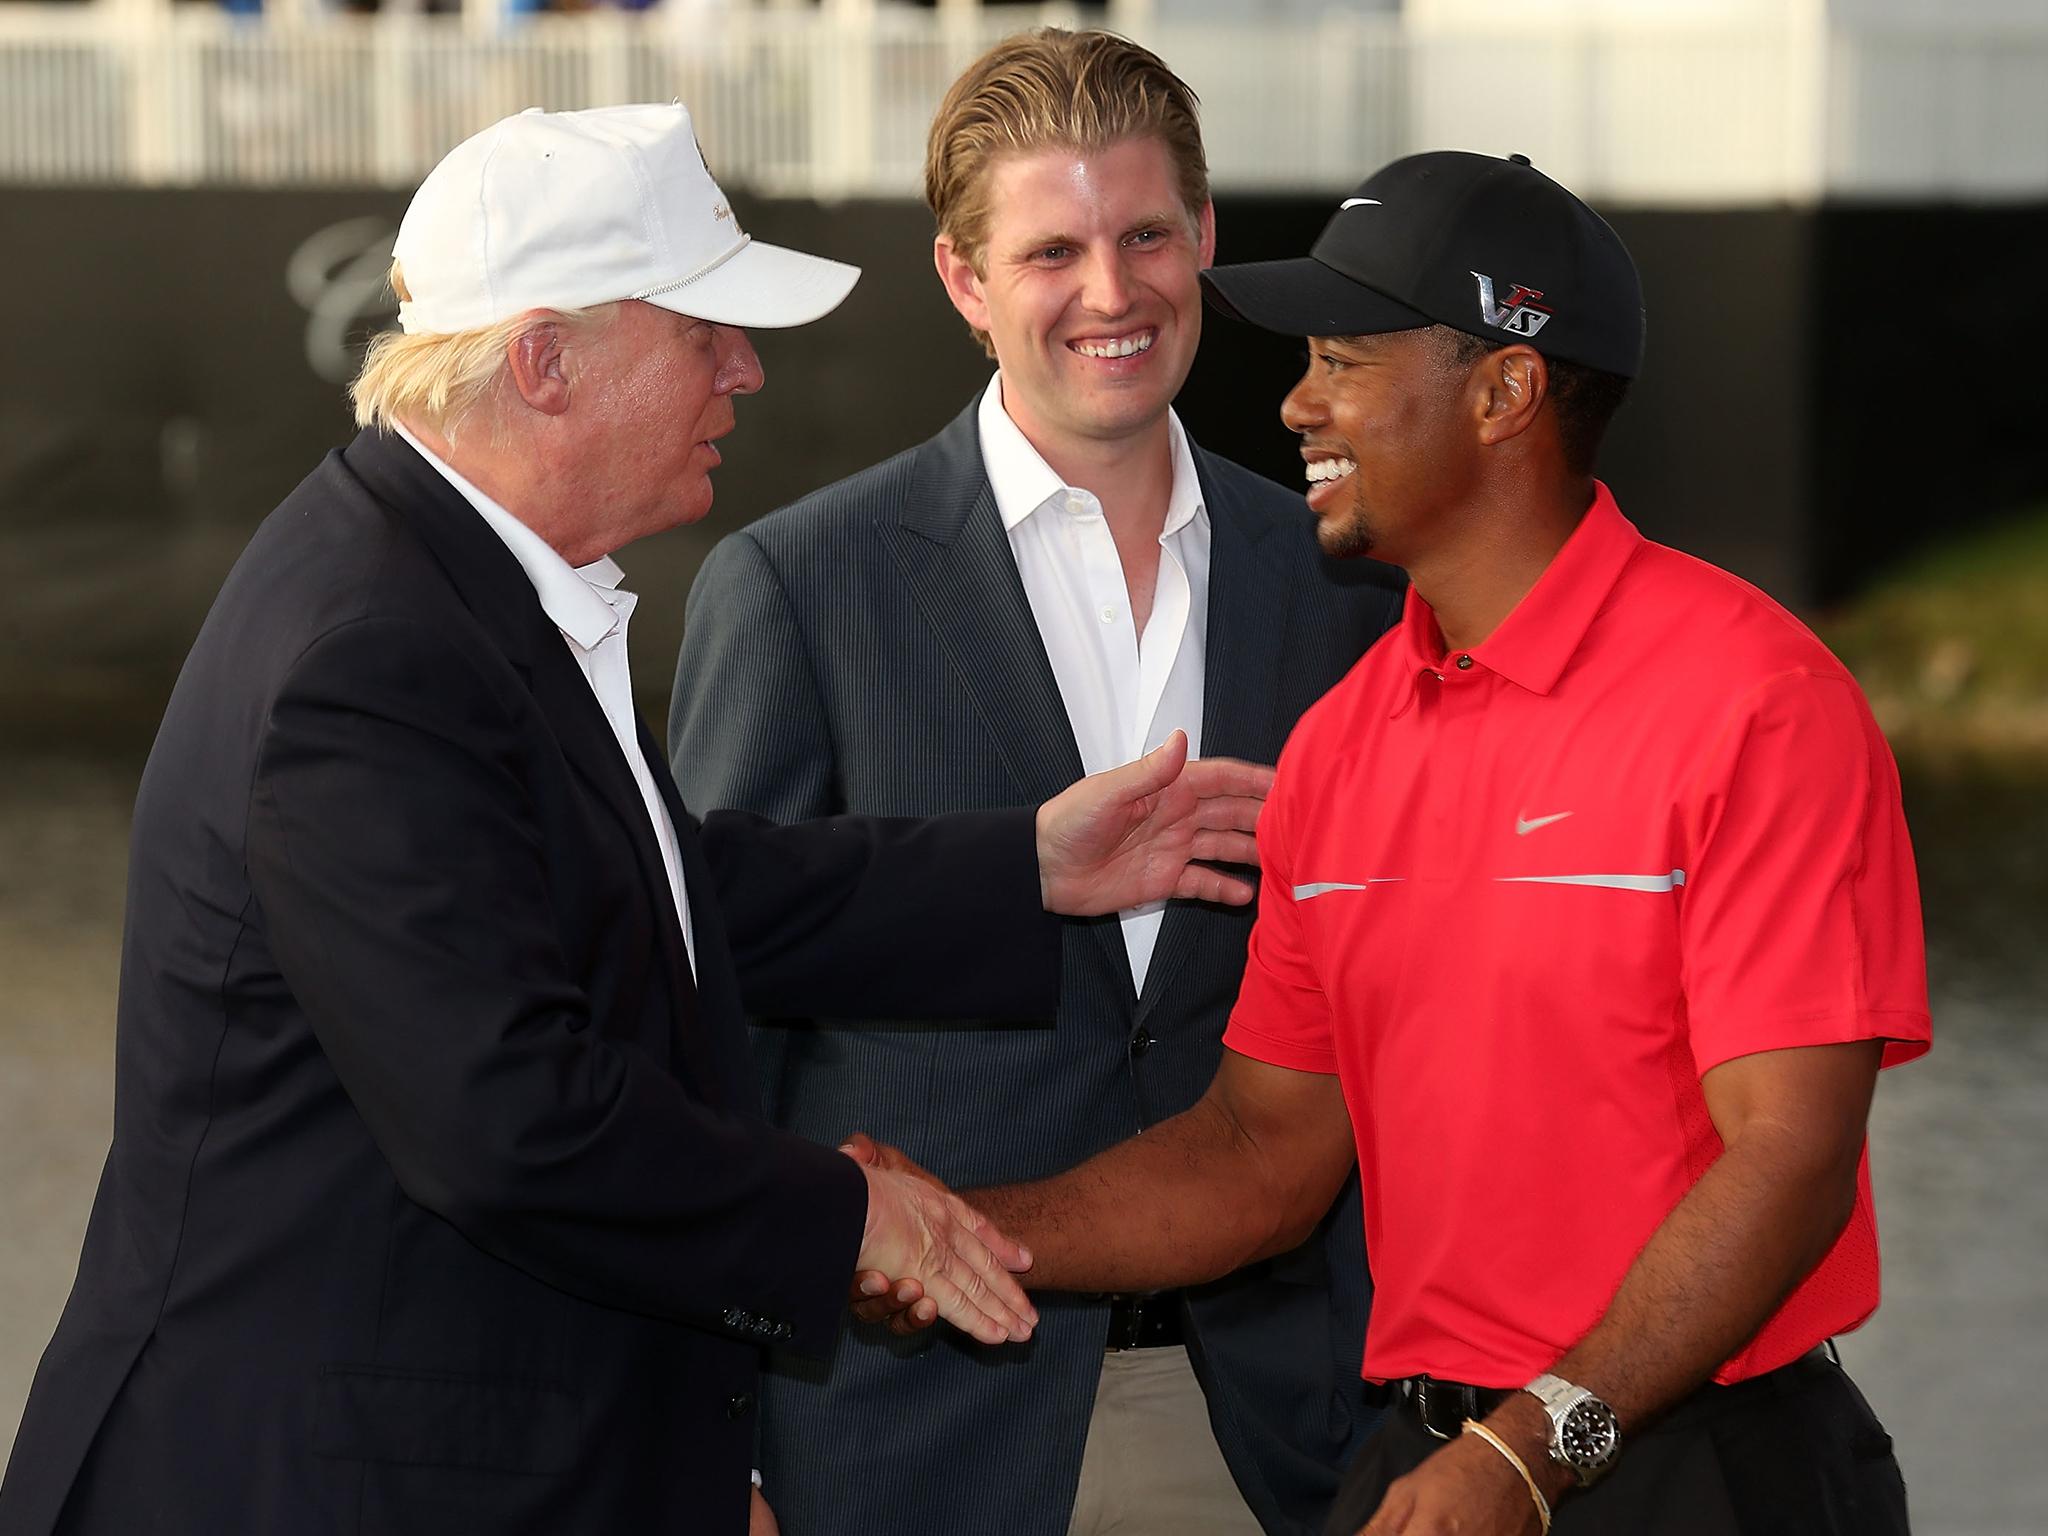 Donald Trump will present Tiger Woods with the Presidential Medal of Freedom